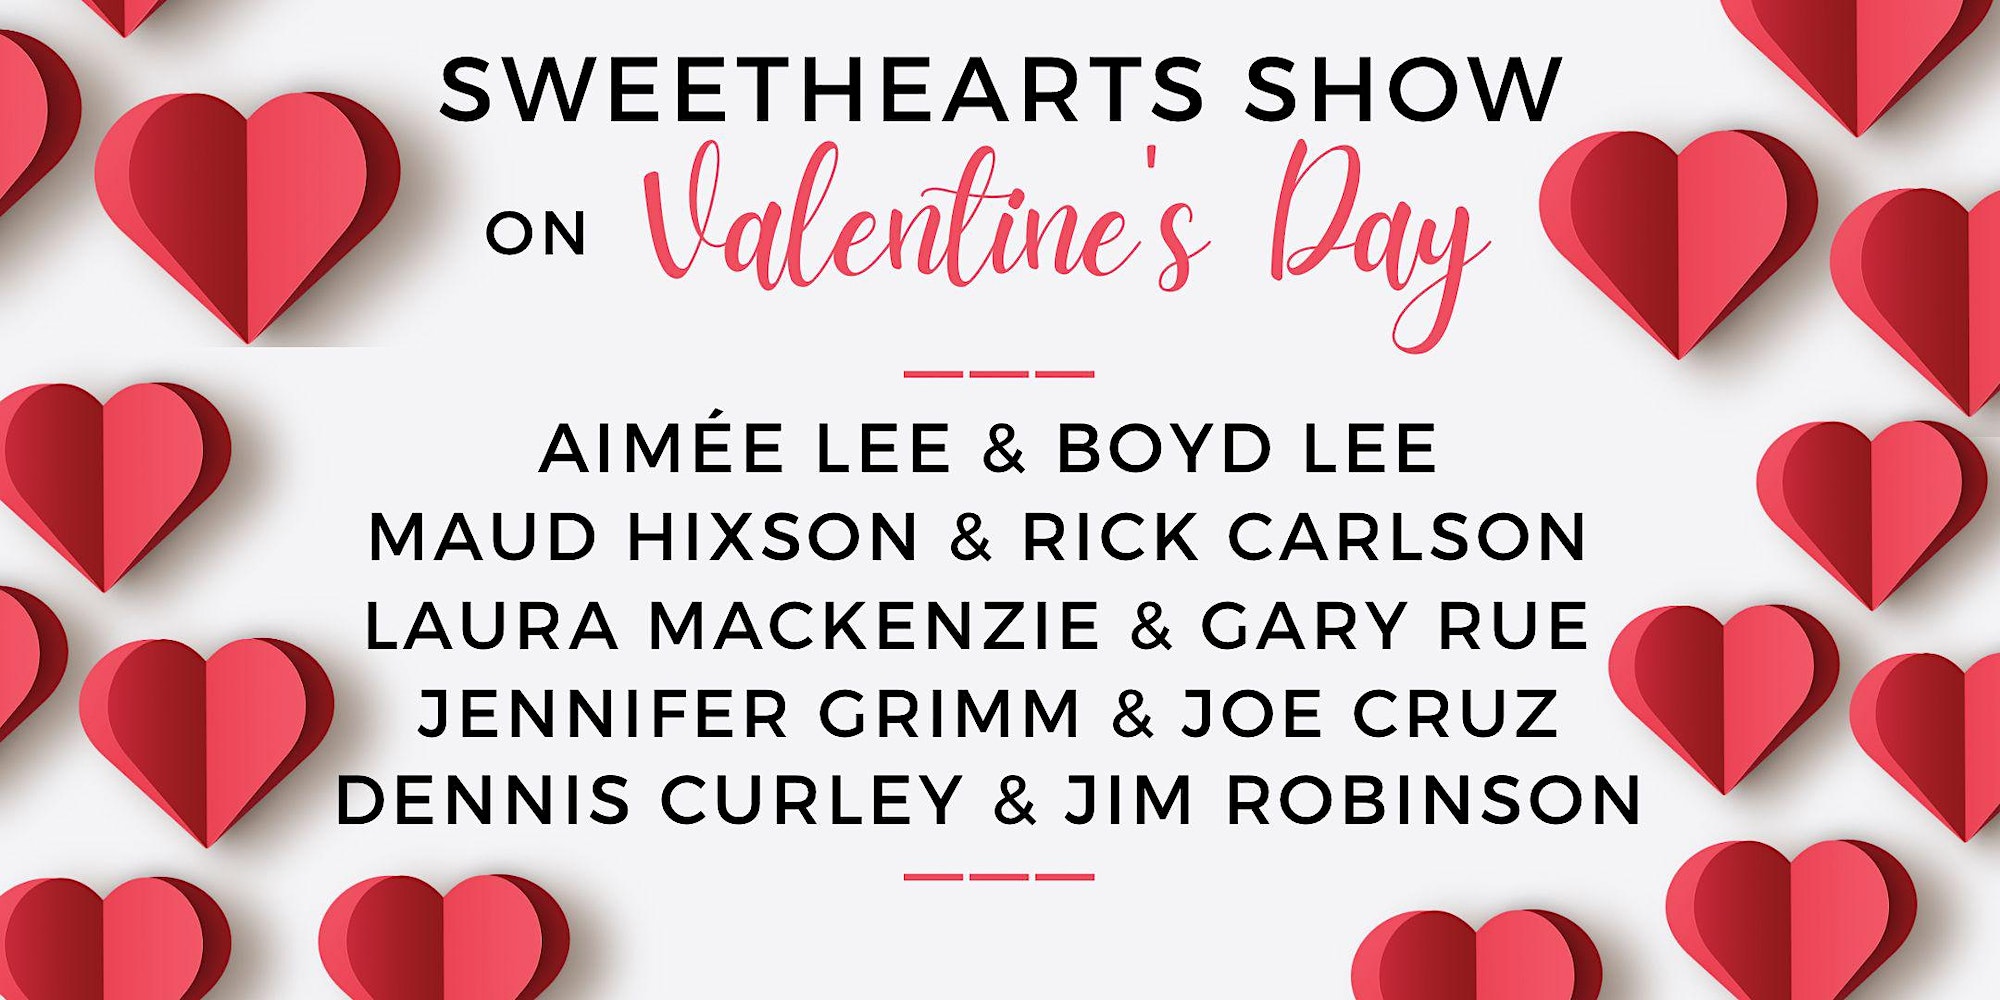 Sweethearts Show on Valentine’s Day